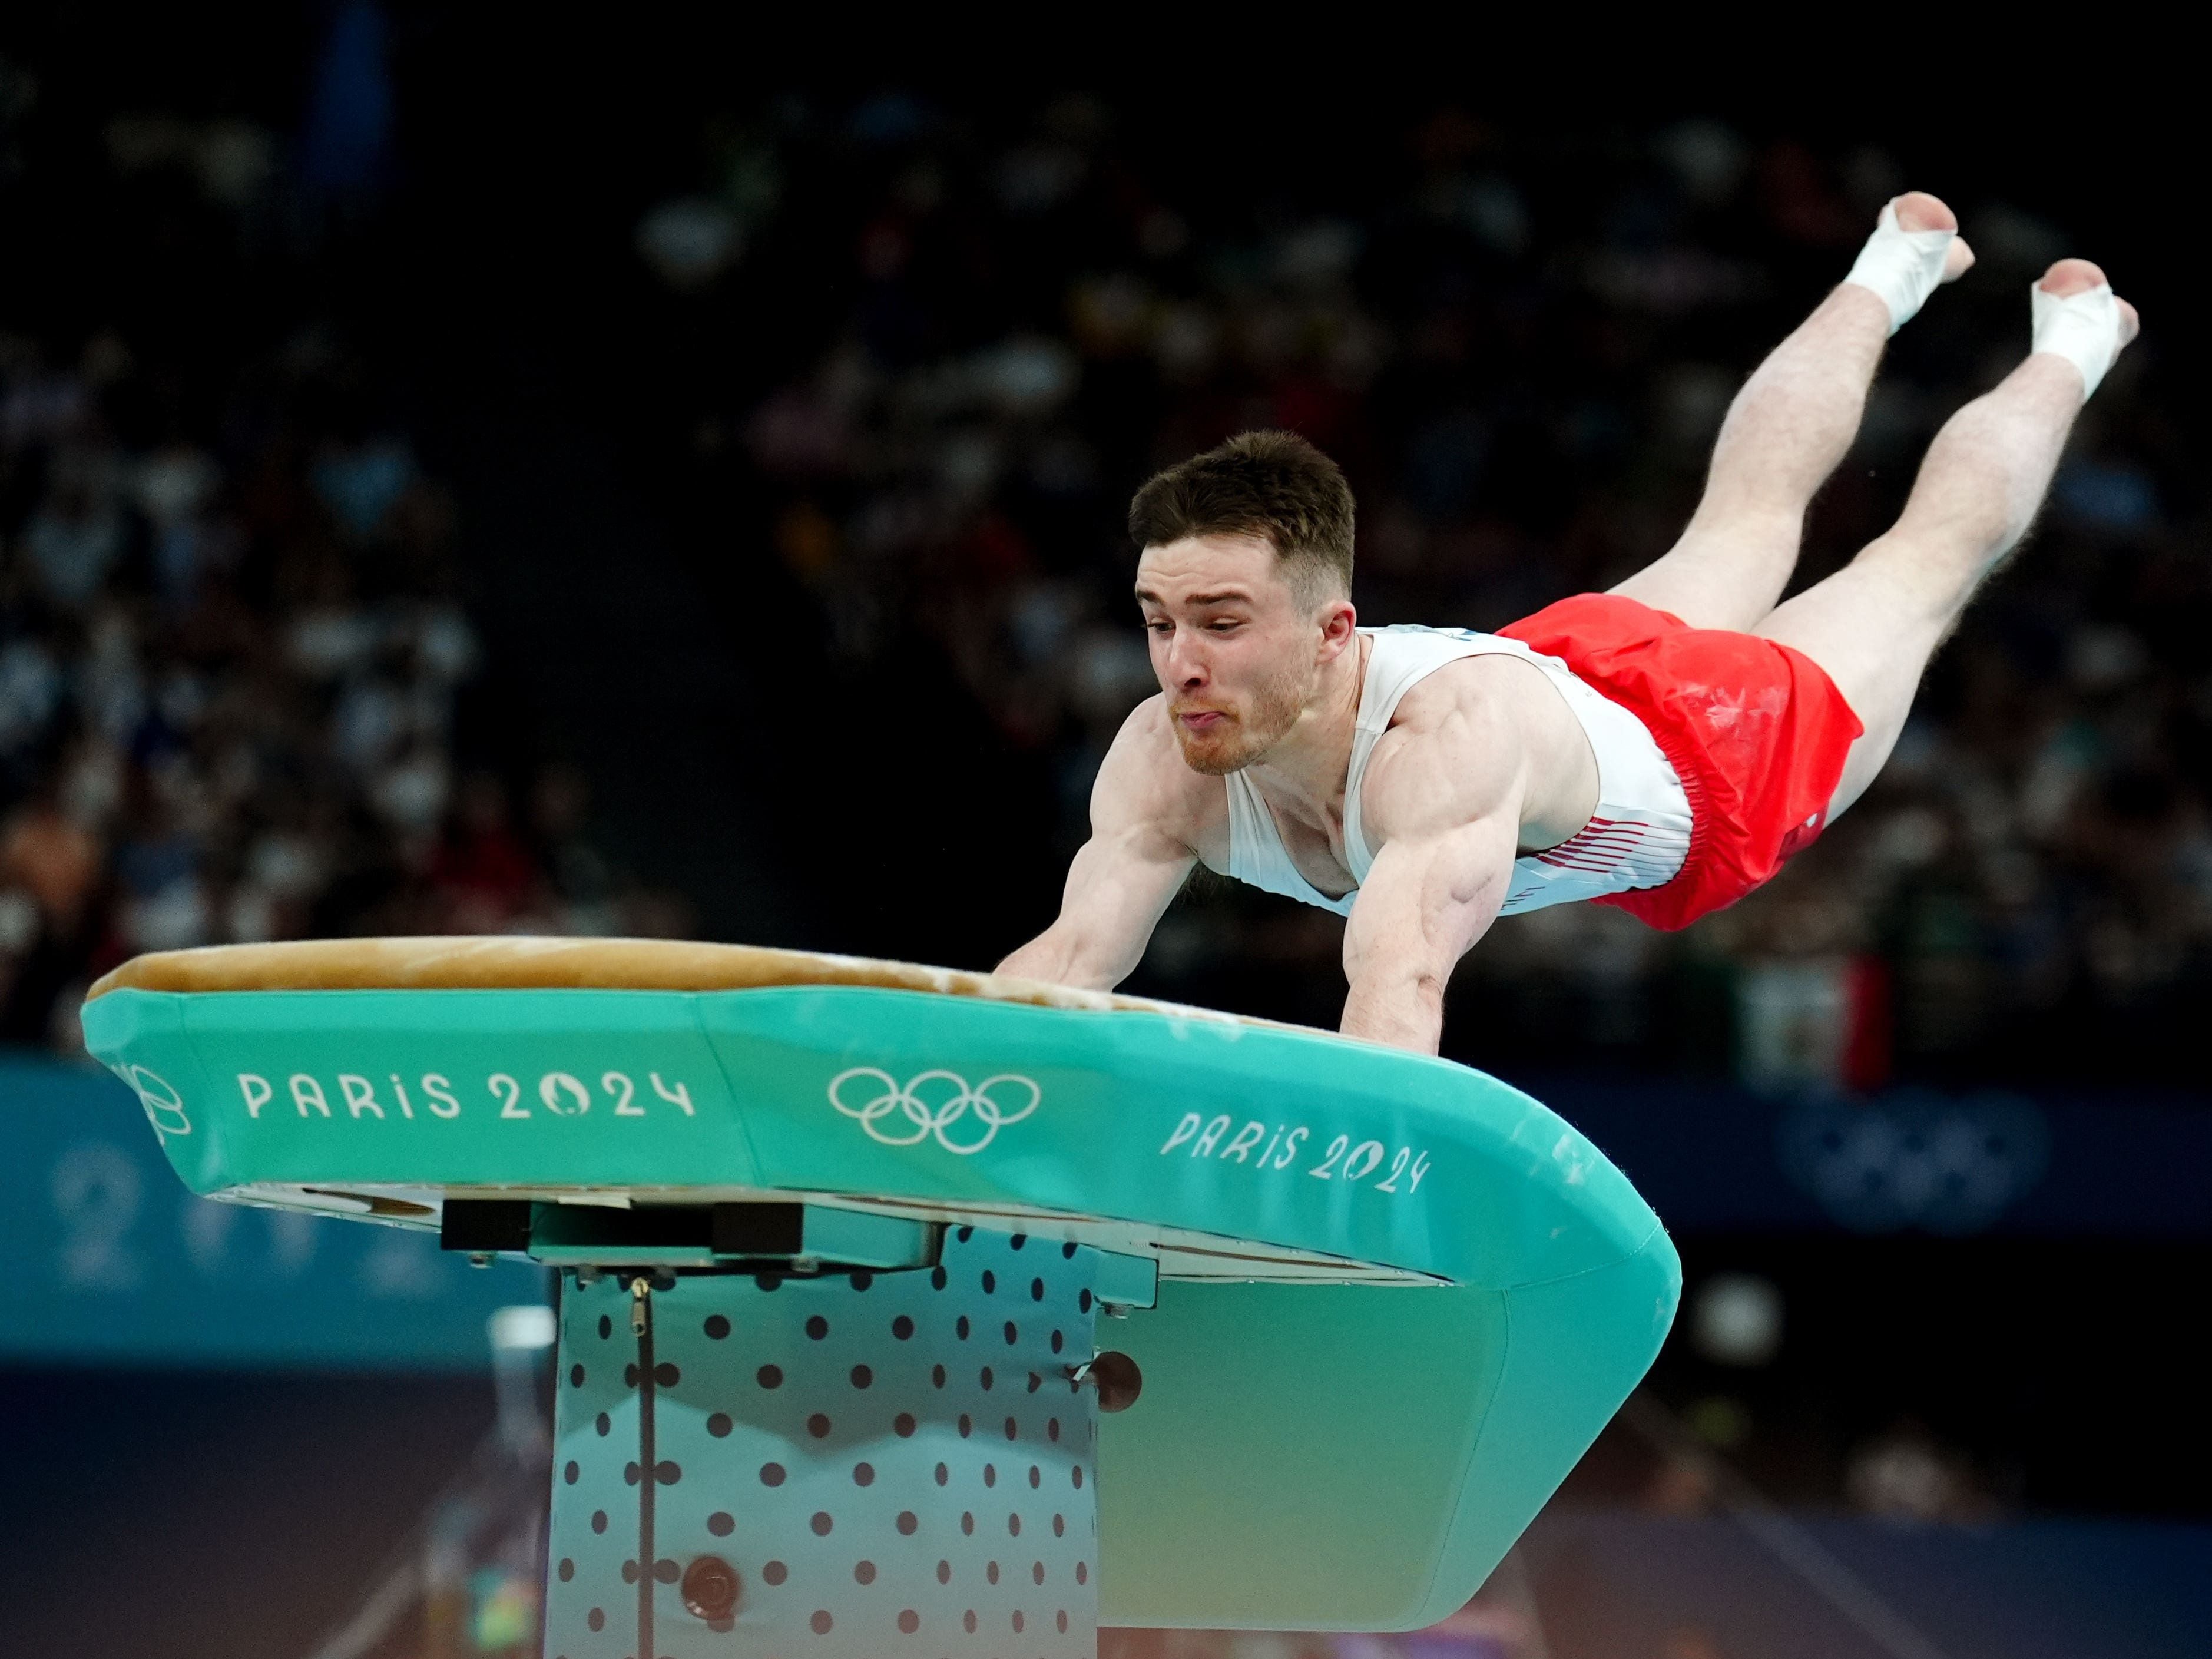 Harry Hepworth takes vault bronze for Great Britain on Olympic debut